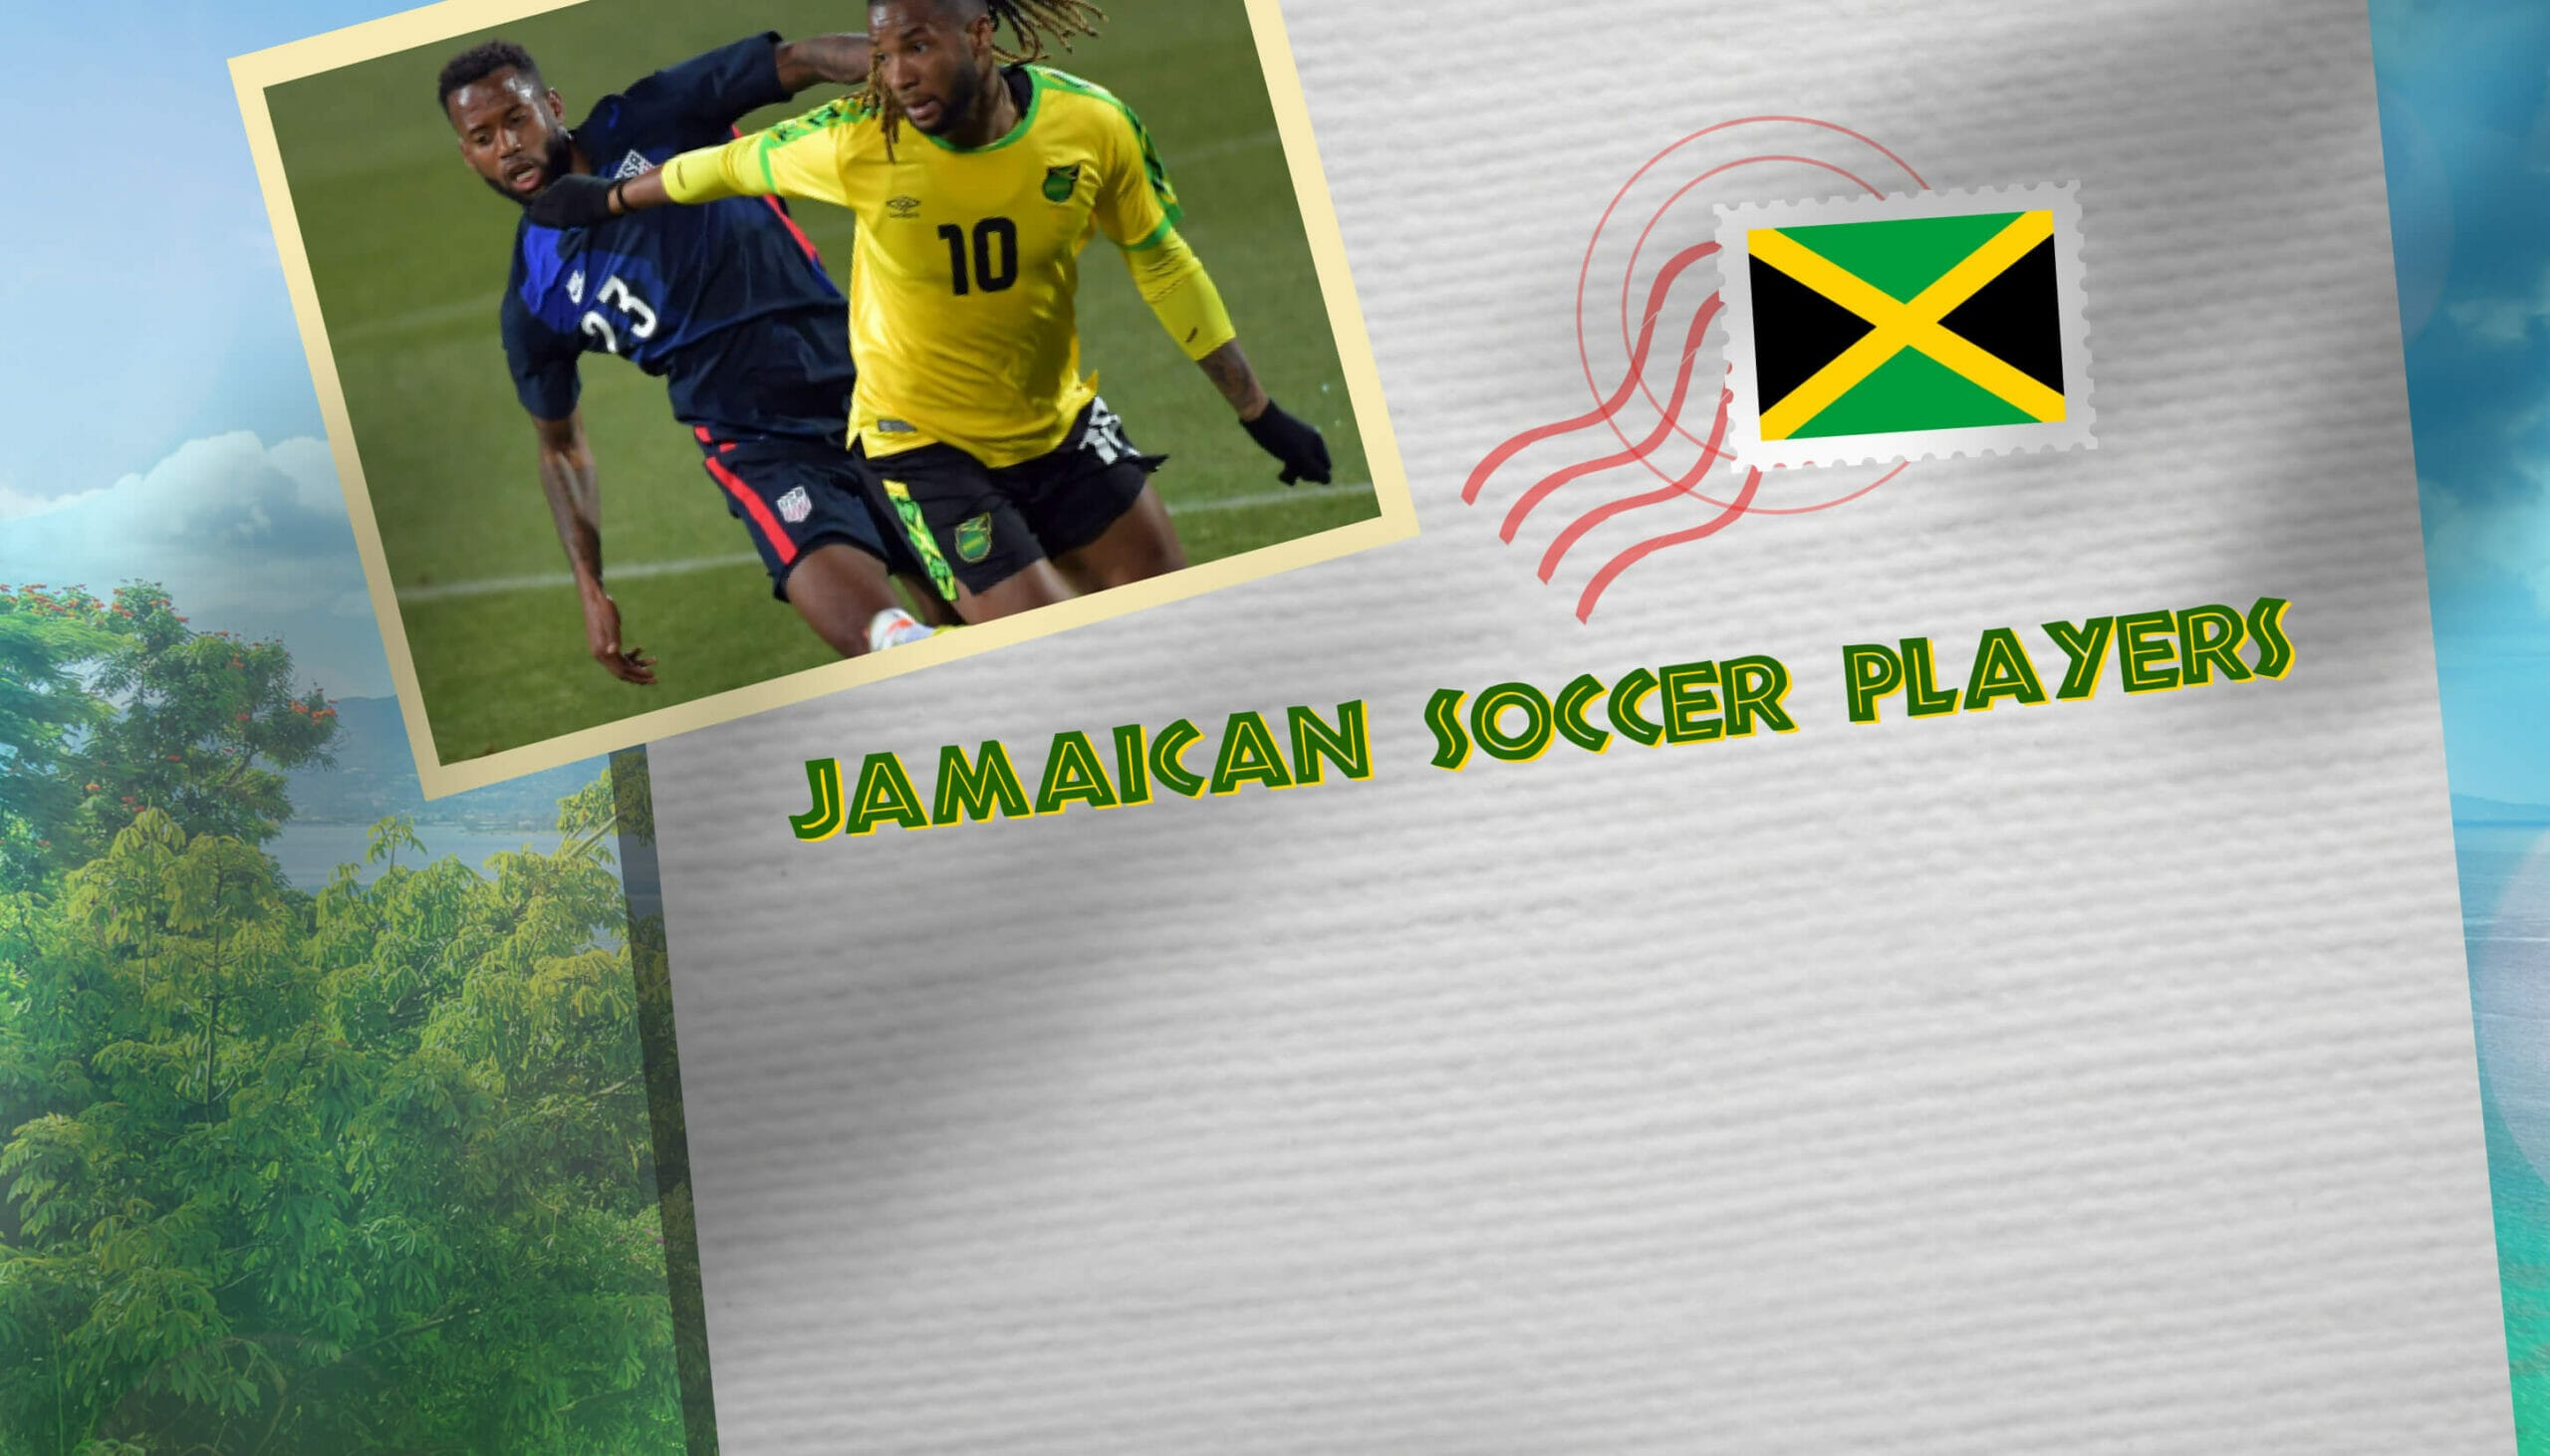 Jamaican Soccer Players